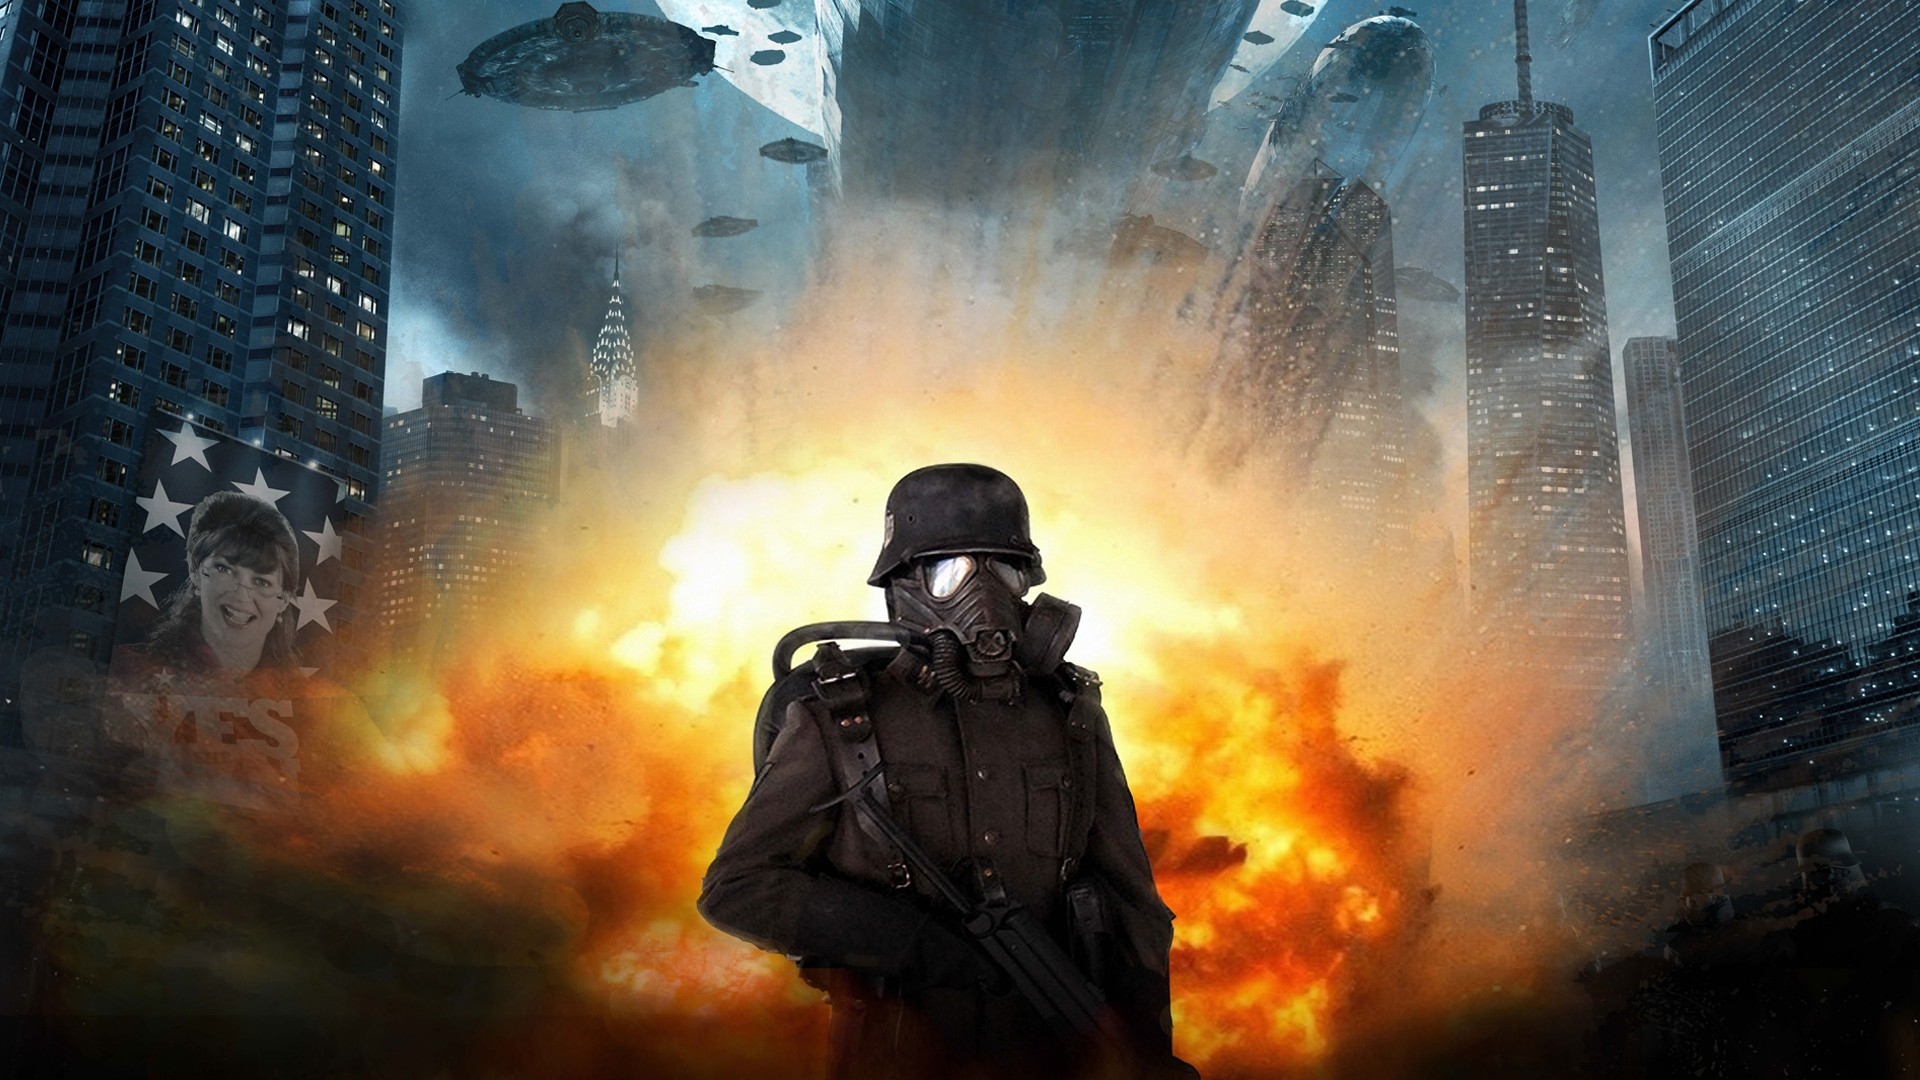 Iron Sky Soldier for 1920 x 1080 HDTV 1080p resolution